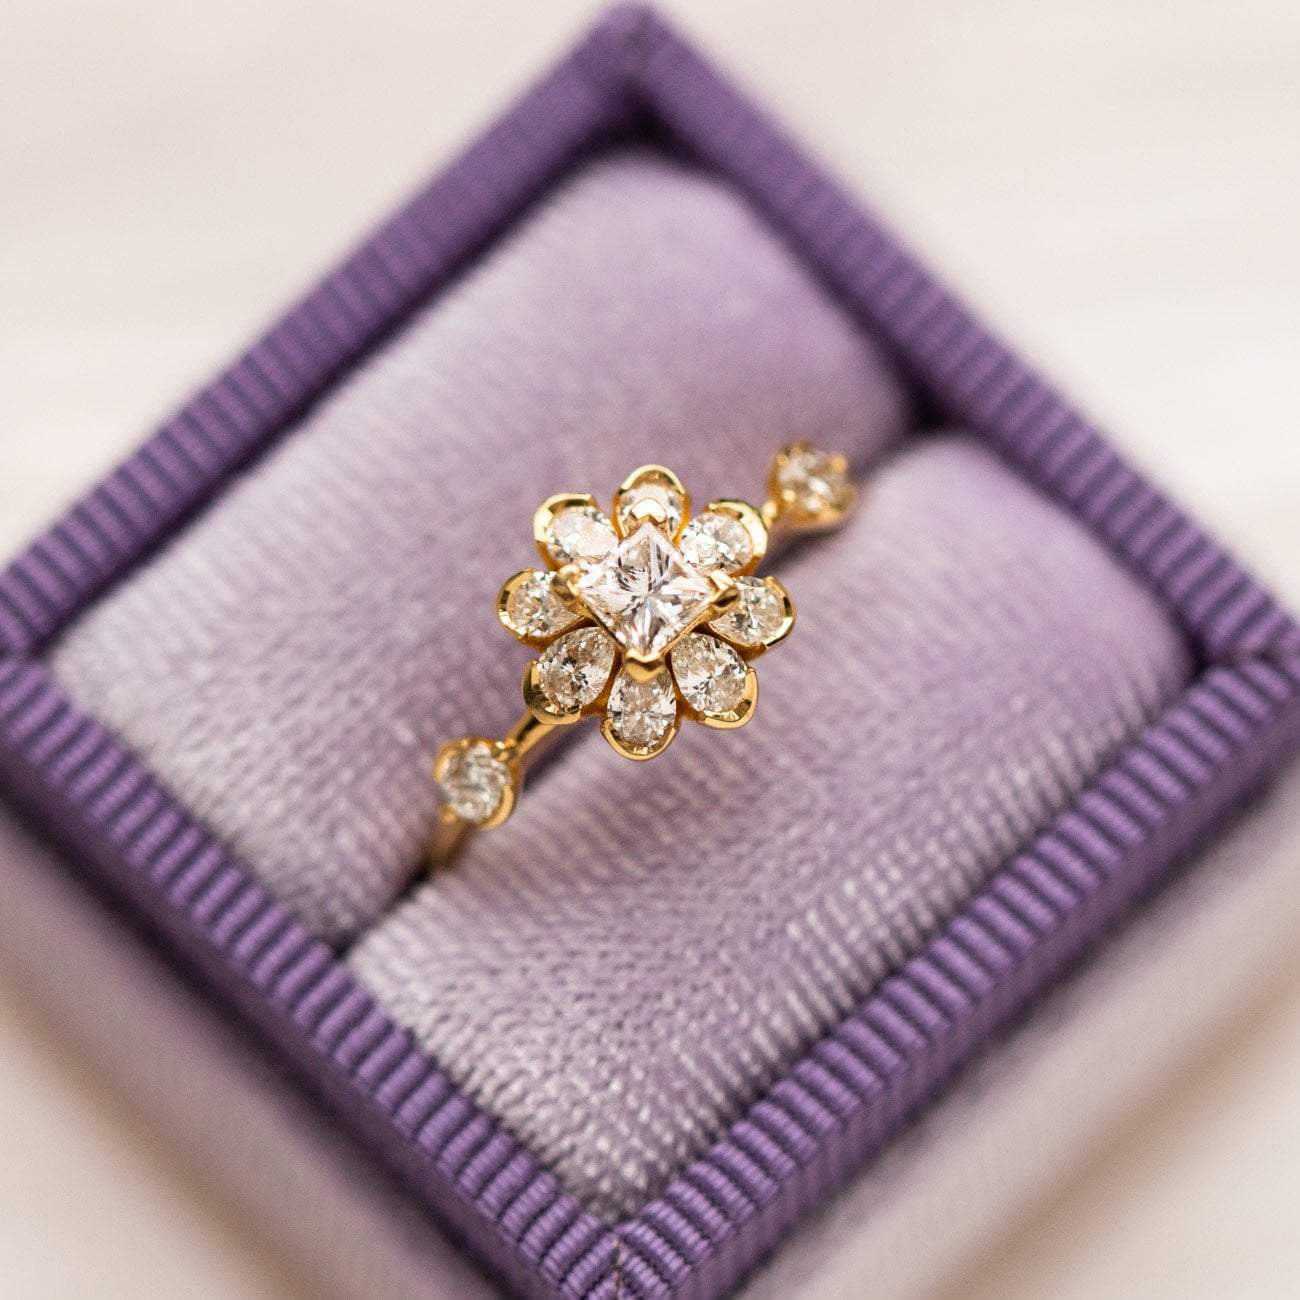 Local Eclectic Gold Diamond Flower Engagement Ring in Box